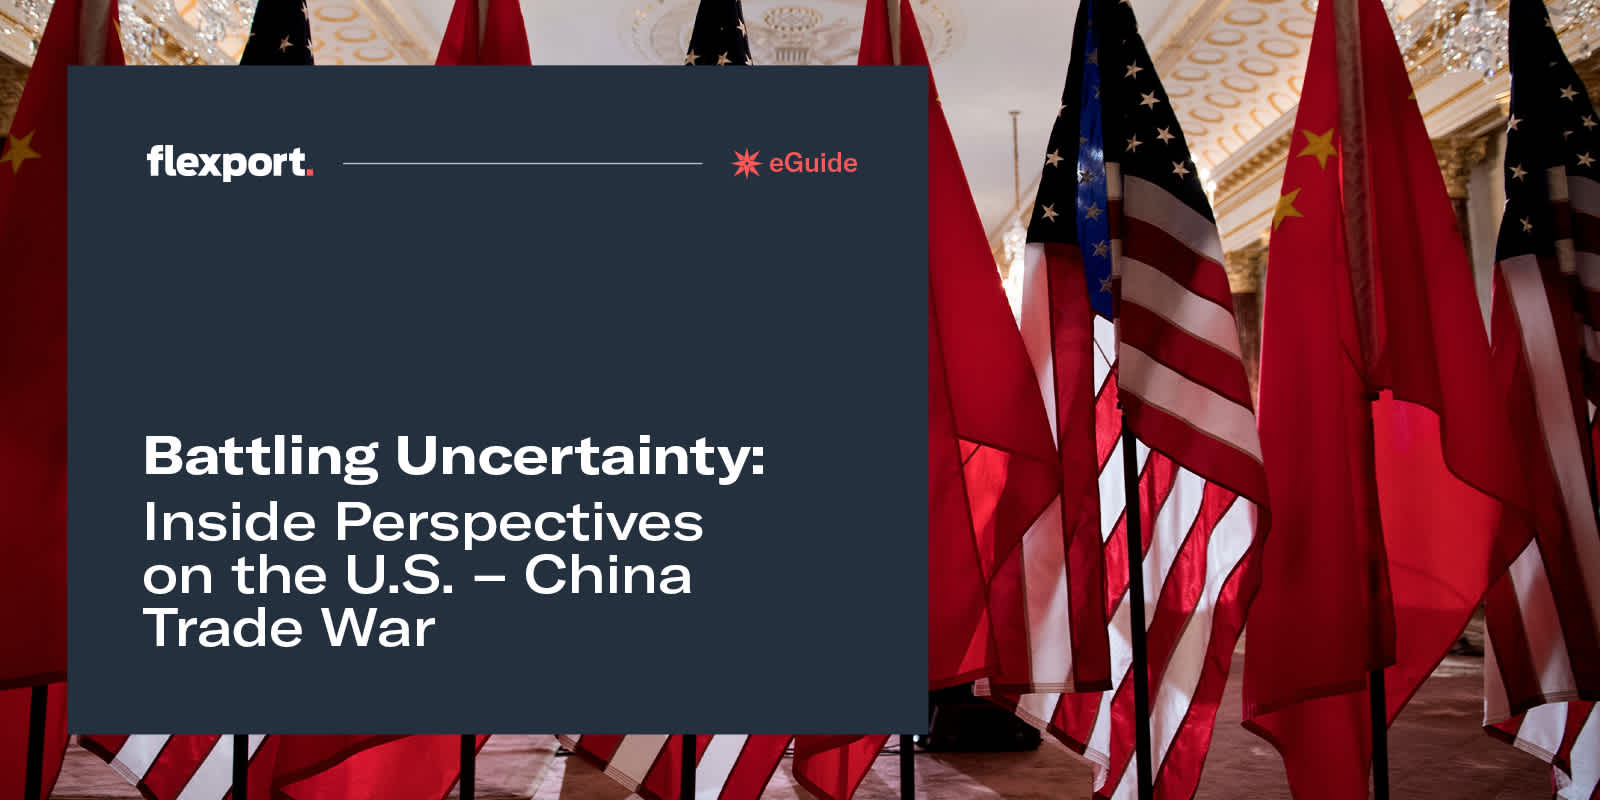 Battling Uncertainty: Inside Perspectives on the U.S.-China Trade War